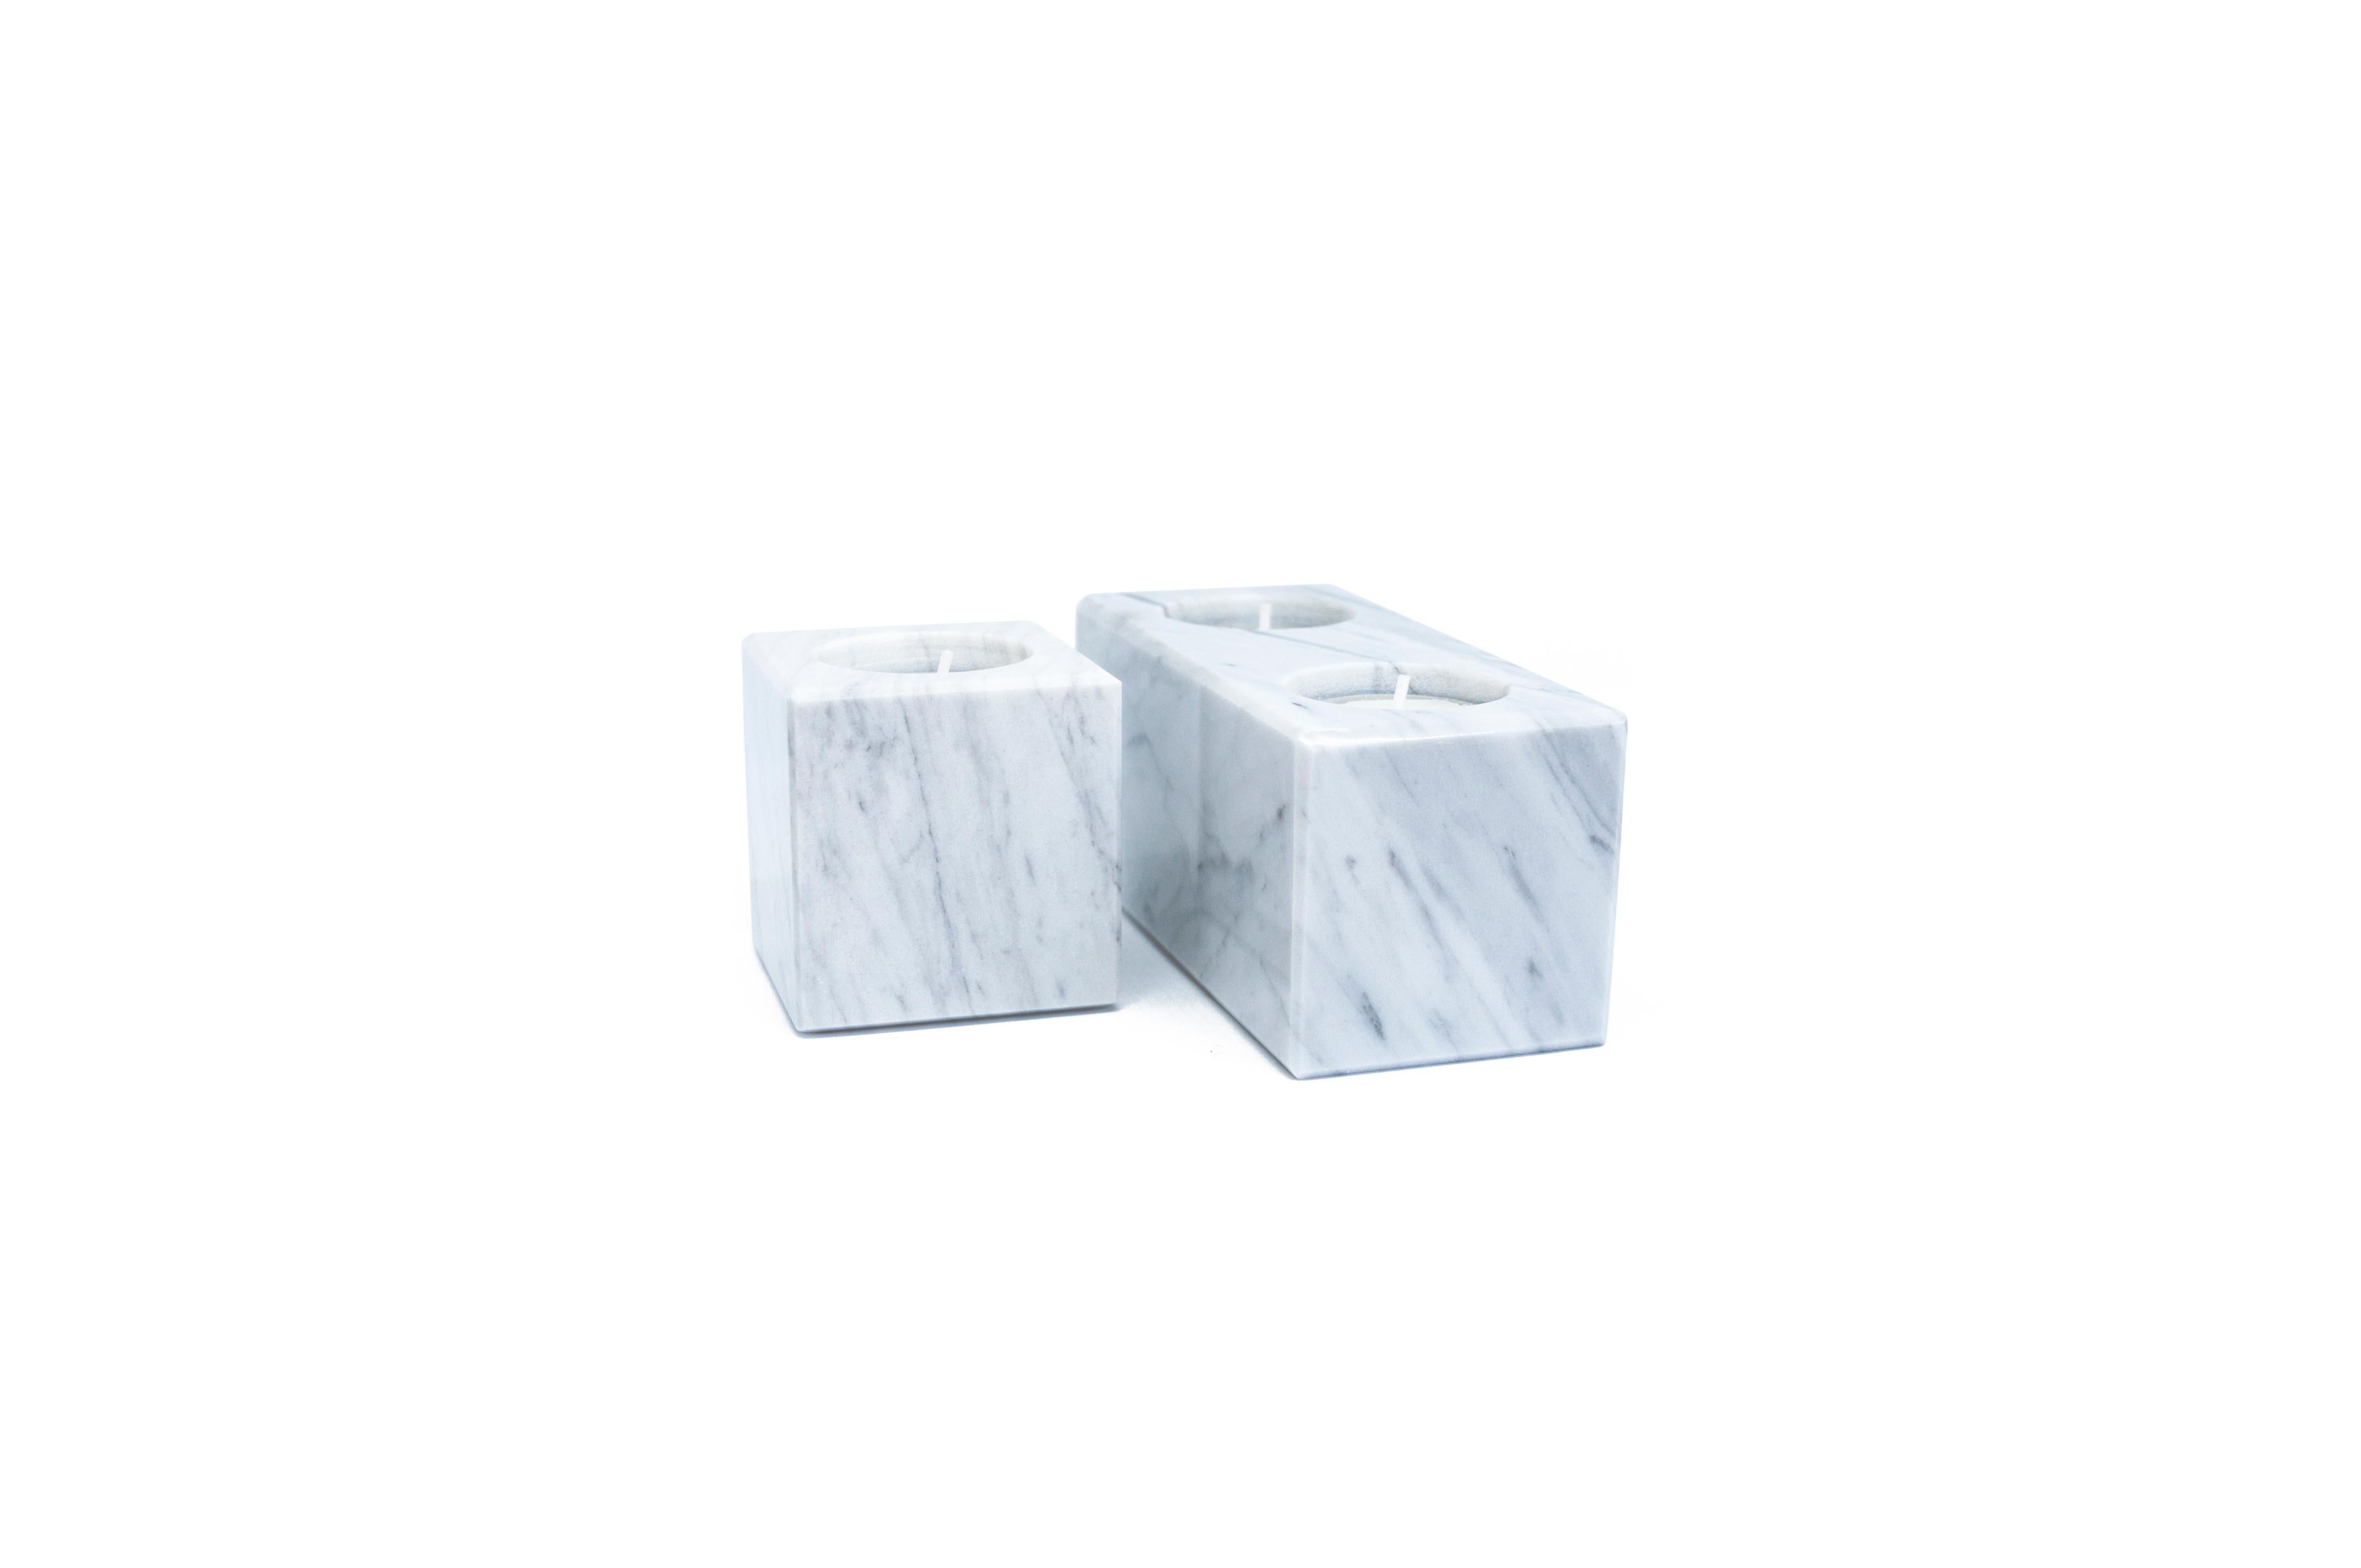 Squared Double Candleholder in White Carrara Marble 3